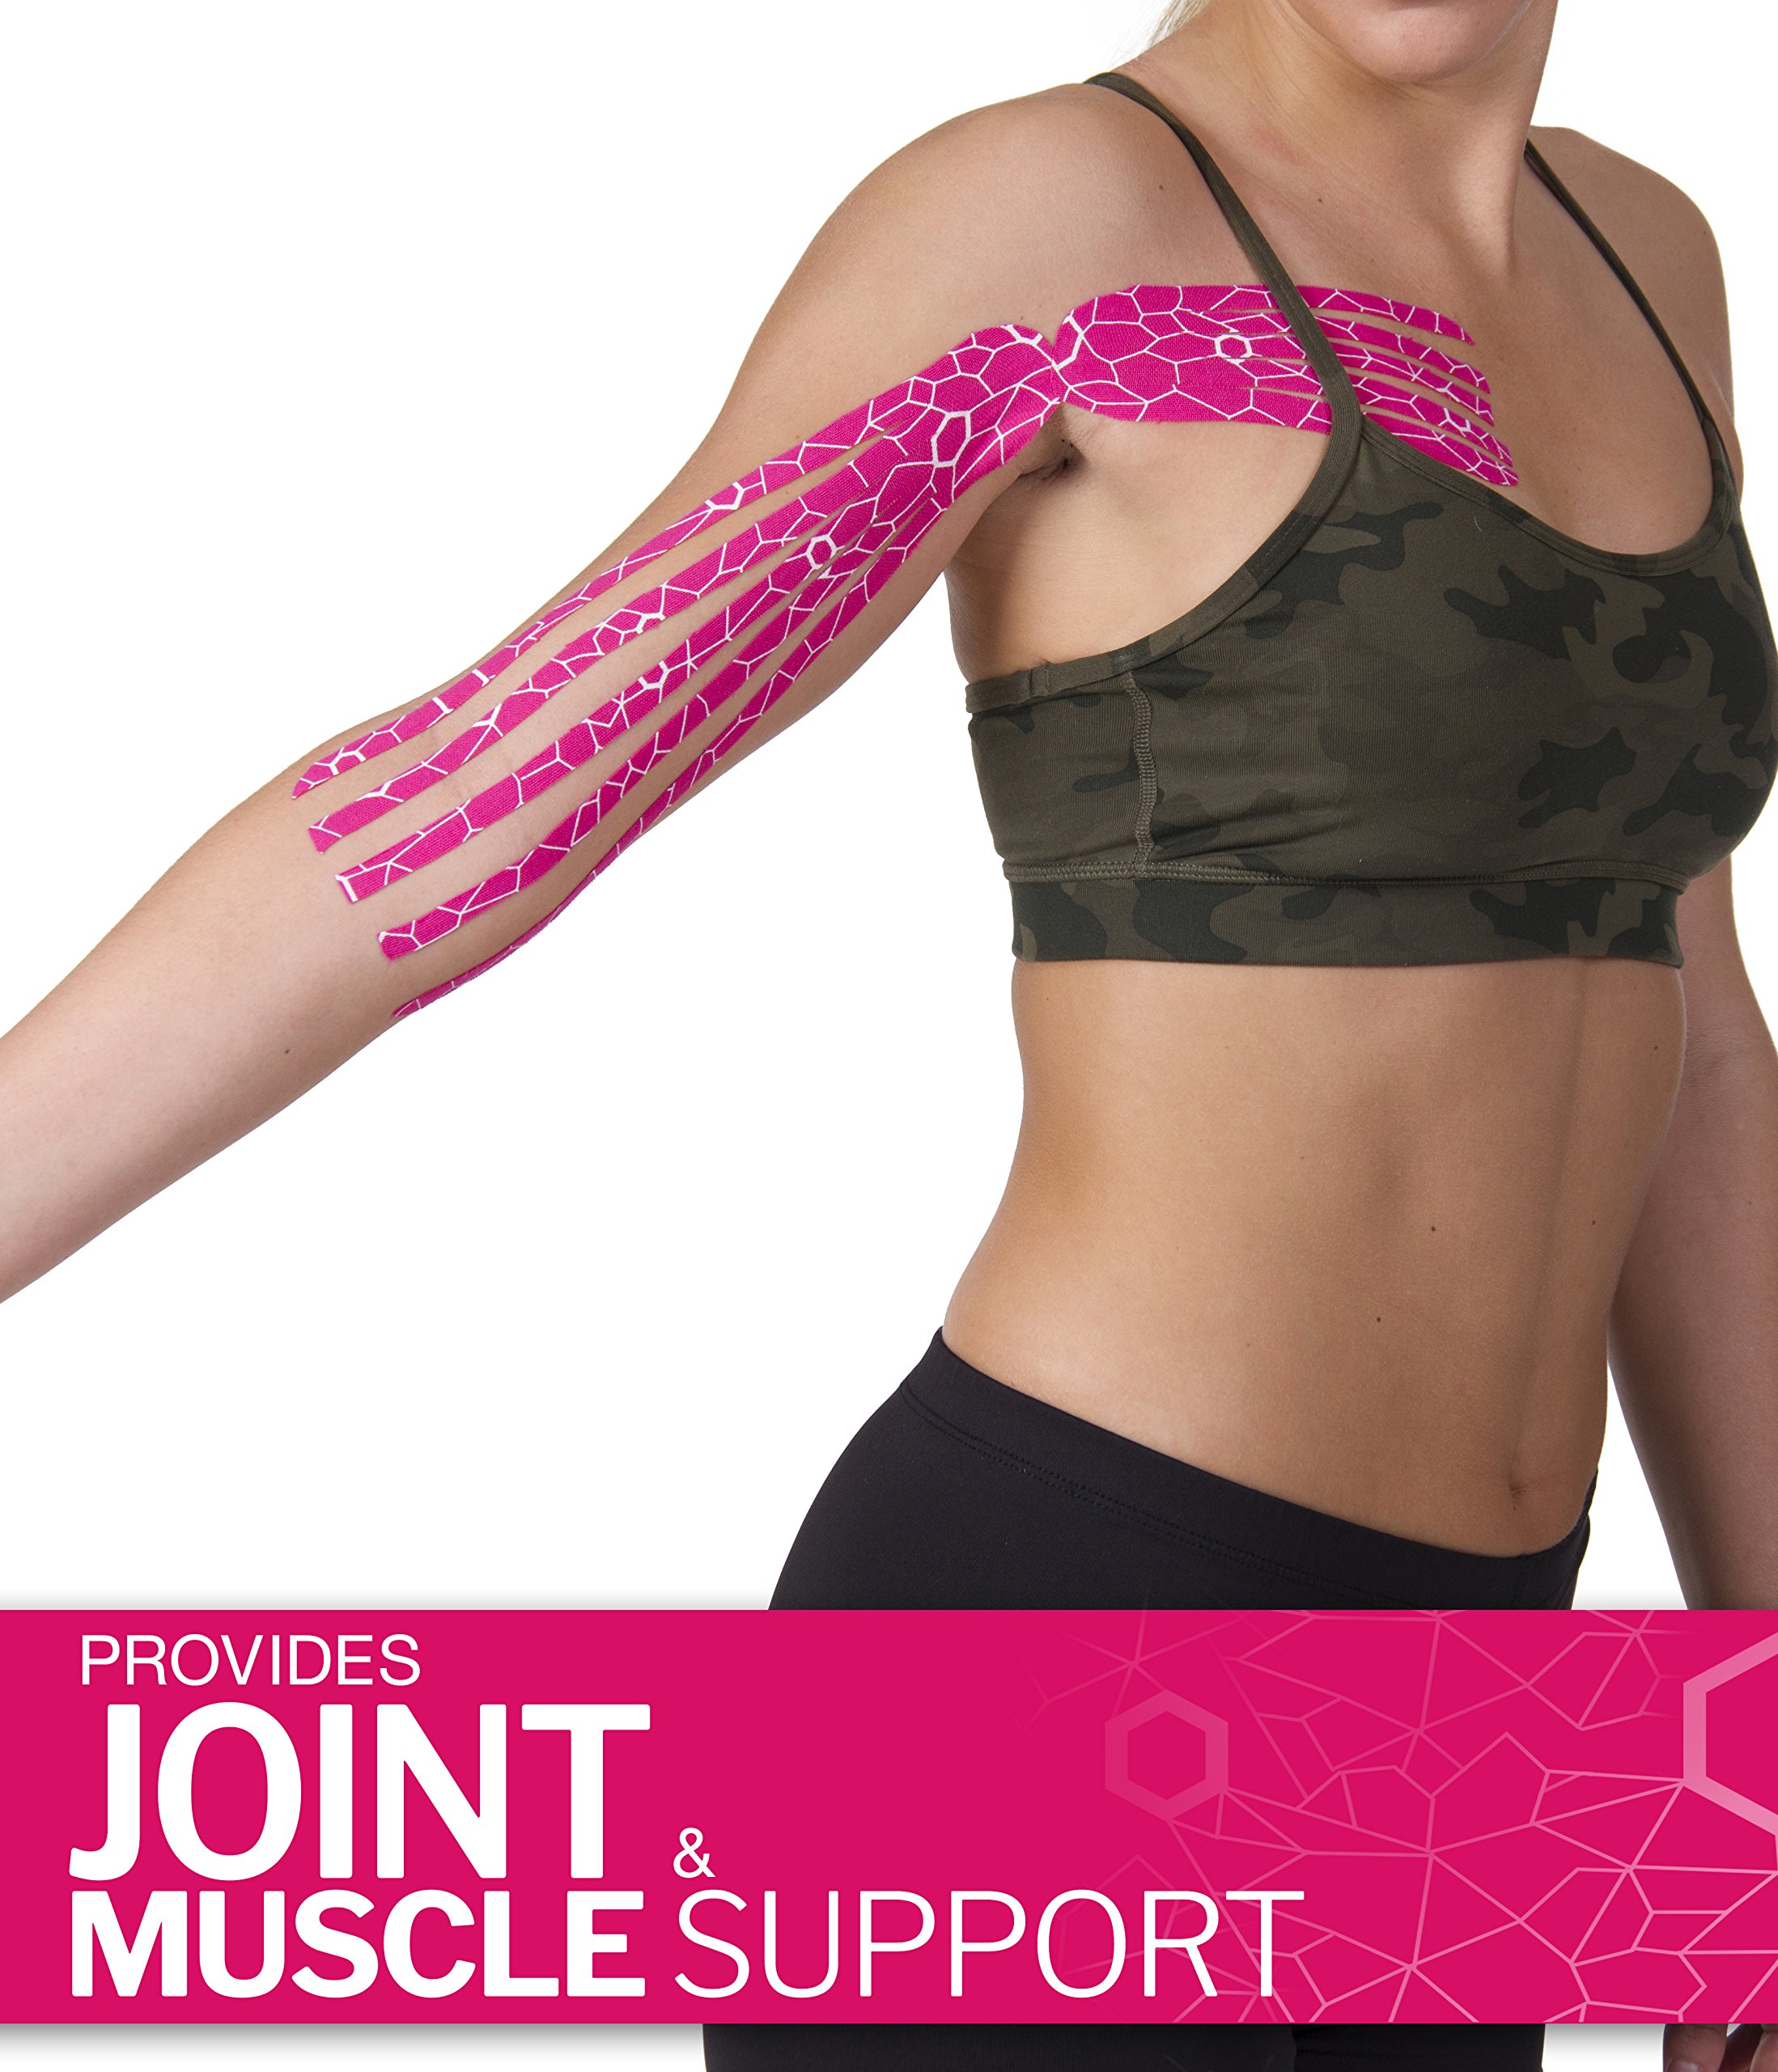 THERABAND Kinesiology Tape, Waterproof Physio Tape for Pain Relief, Muscle & Joint Support, Standard Roll with XactStretch Application Indicators, 2